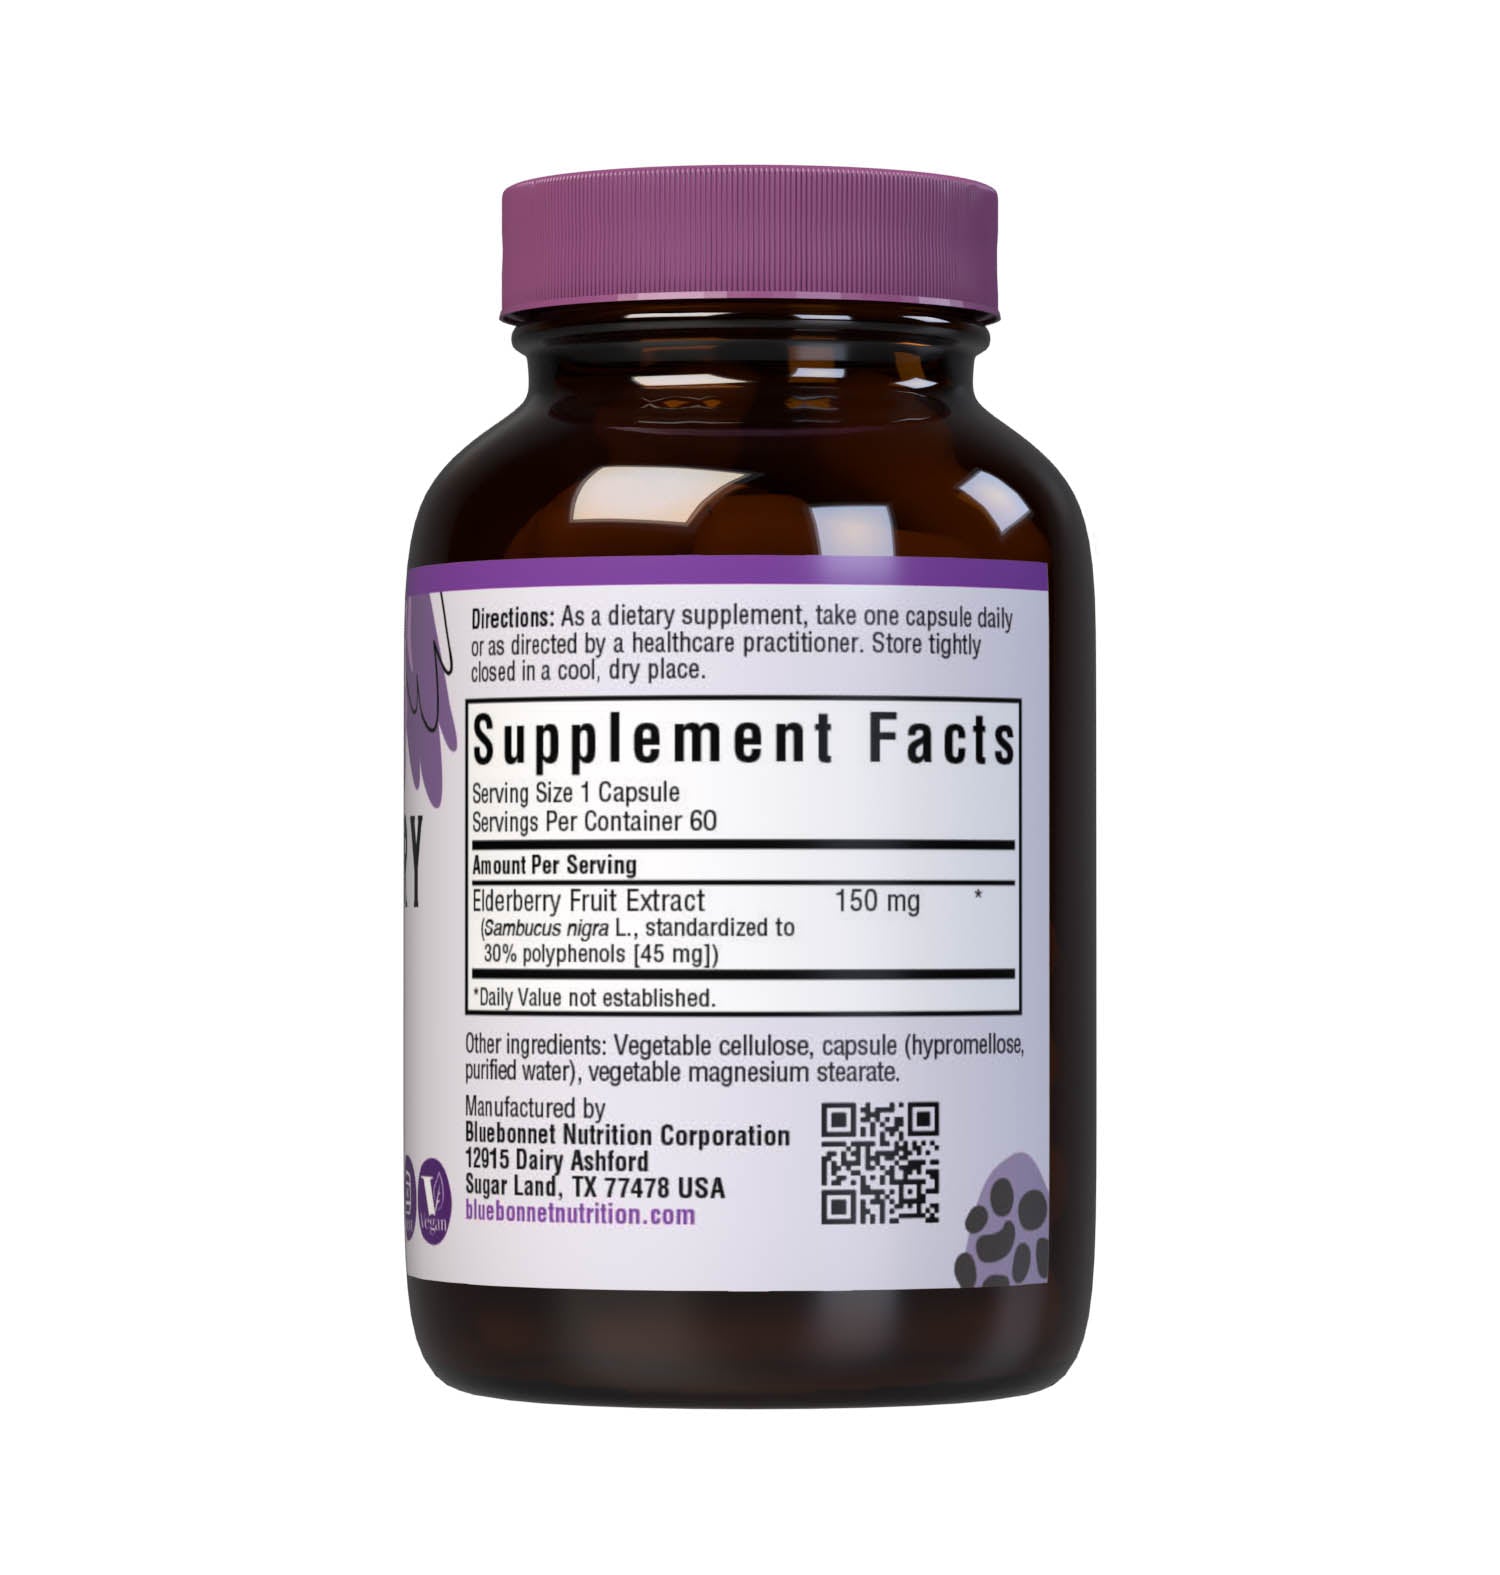 Bluebonnet’s Elderberry Fruit Extract 60 Vegetable Capsules contain a standardized extract of polyphenols, the most researched active constituents found in elderberry, which may help support immune health. A clean and gentle water-based extraction method is employed to capture and preserve elderberry’s most valuable components. Supplement facts panel. #size_60 count